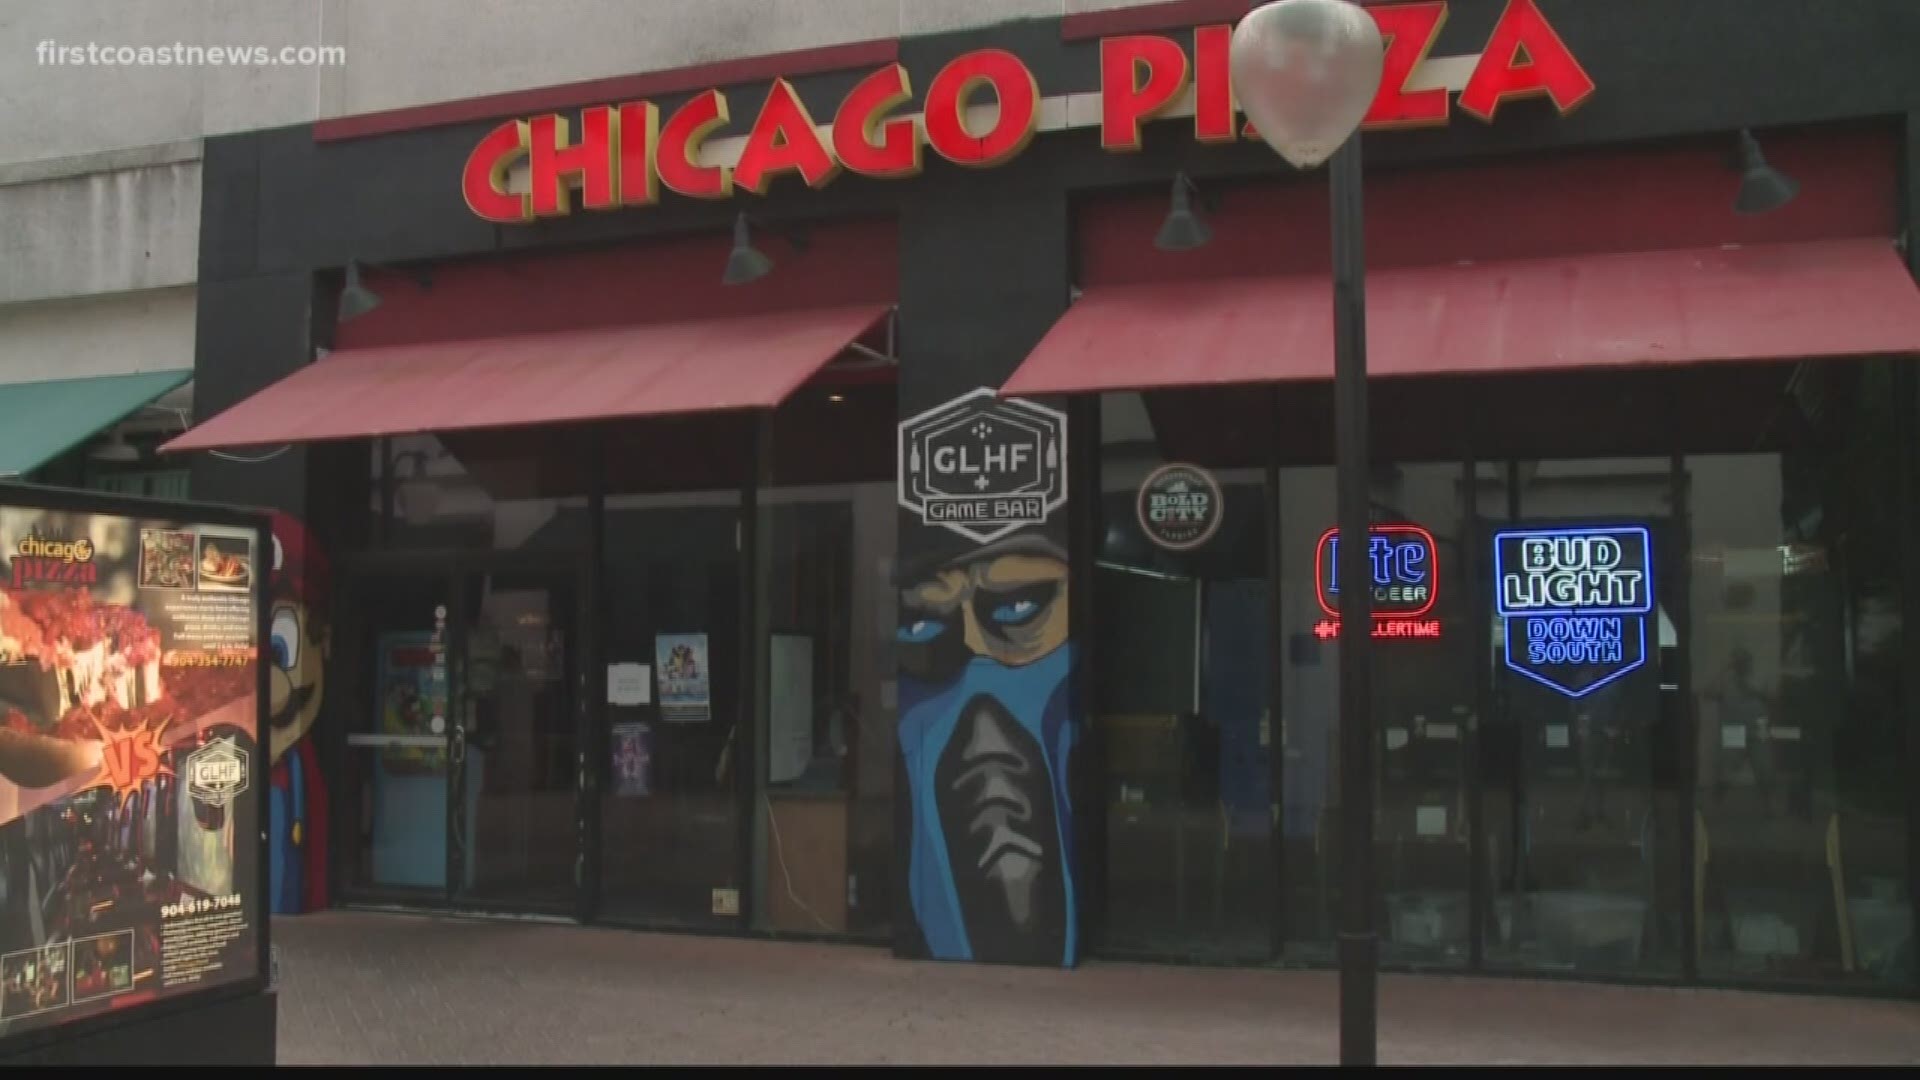 Chicago Pizza will be reopening for normal business hours on Friday, Oct. 5 after the August 26 shooting that claimed the life of two gamers and injured more than a dozen.